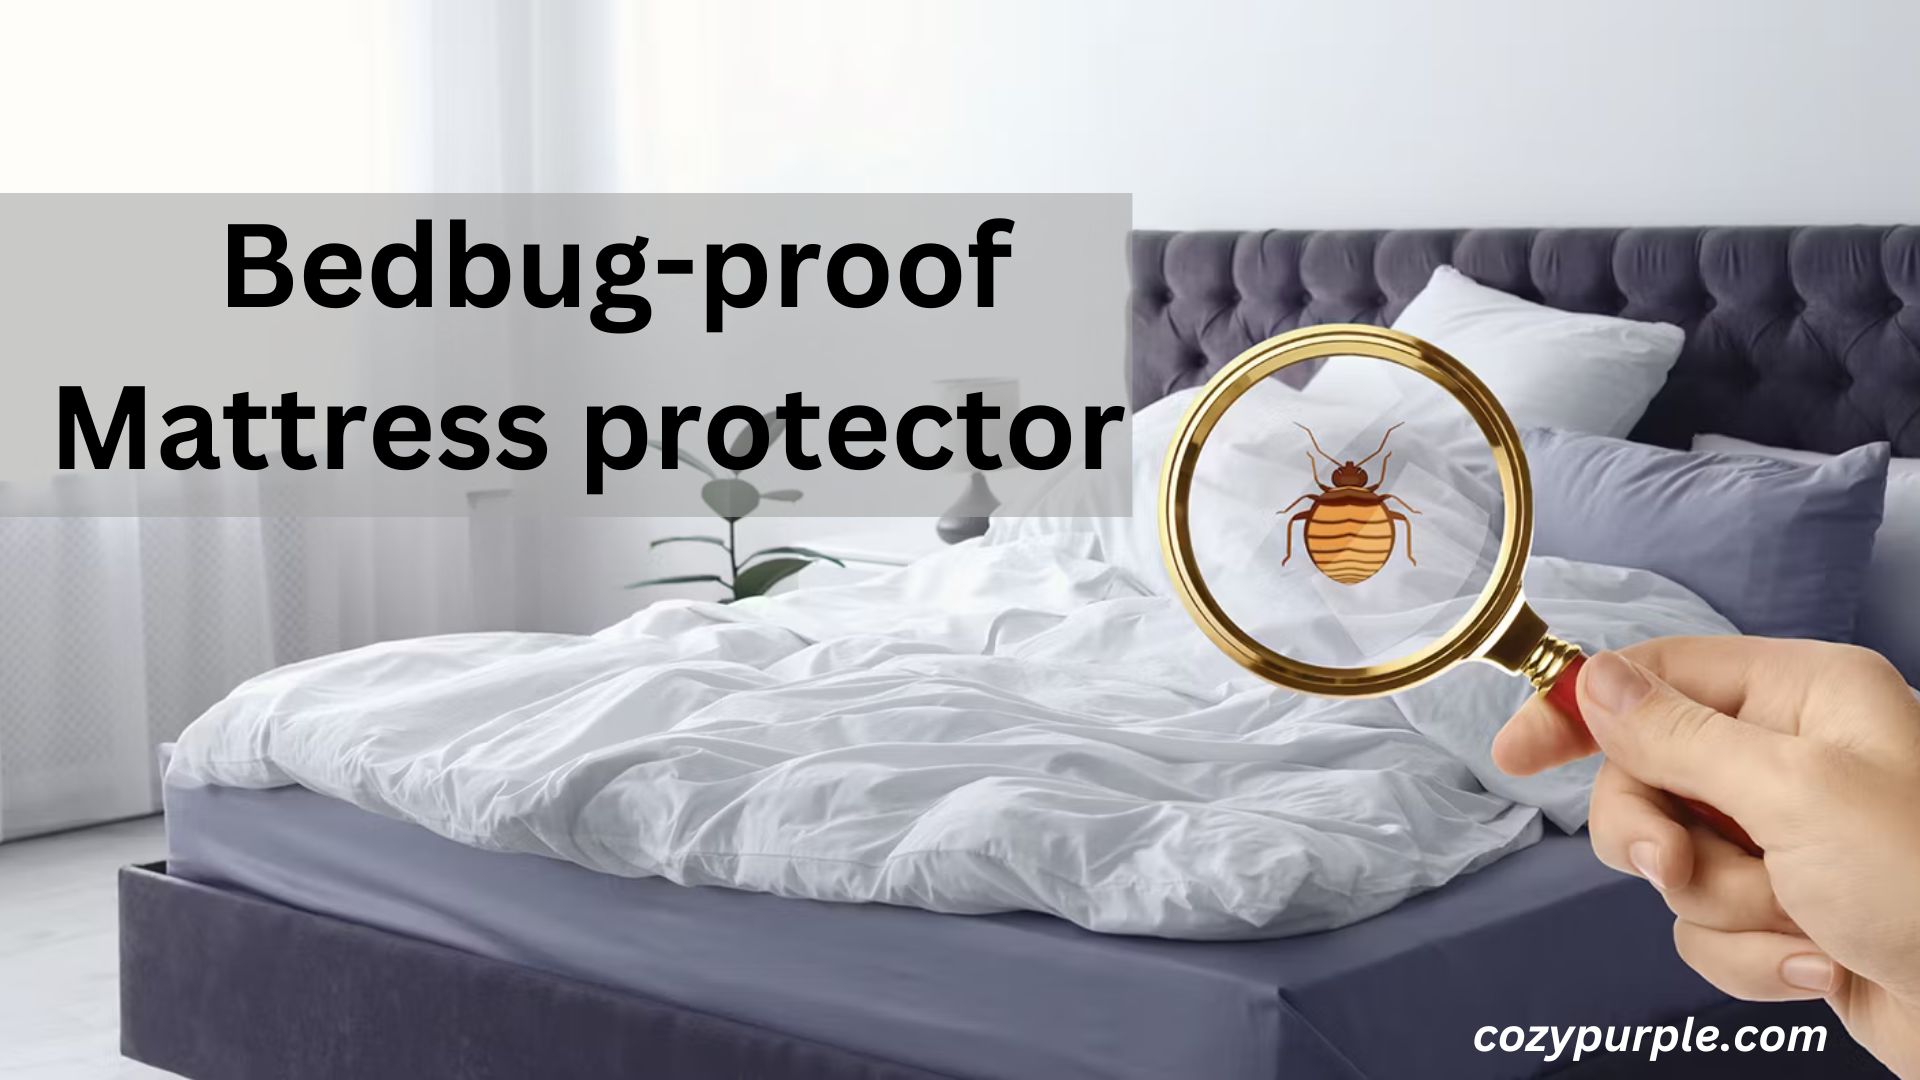 Will a mattress protector stop bed bugs?